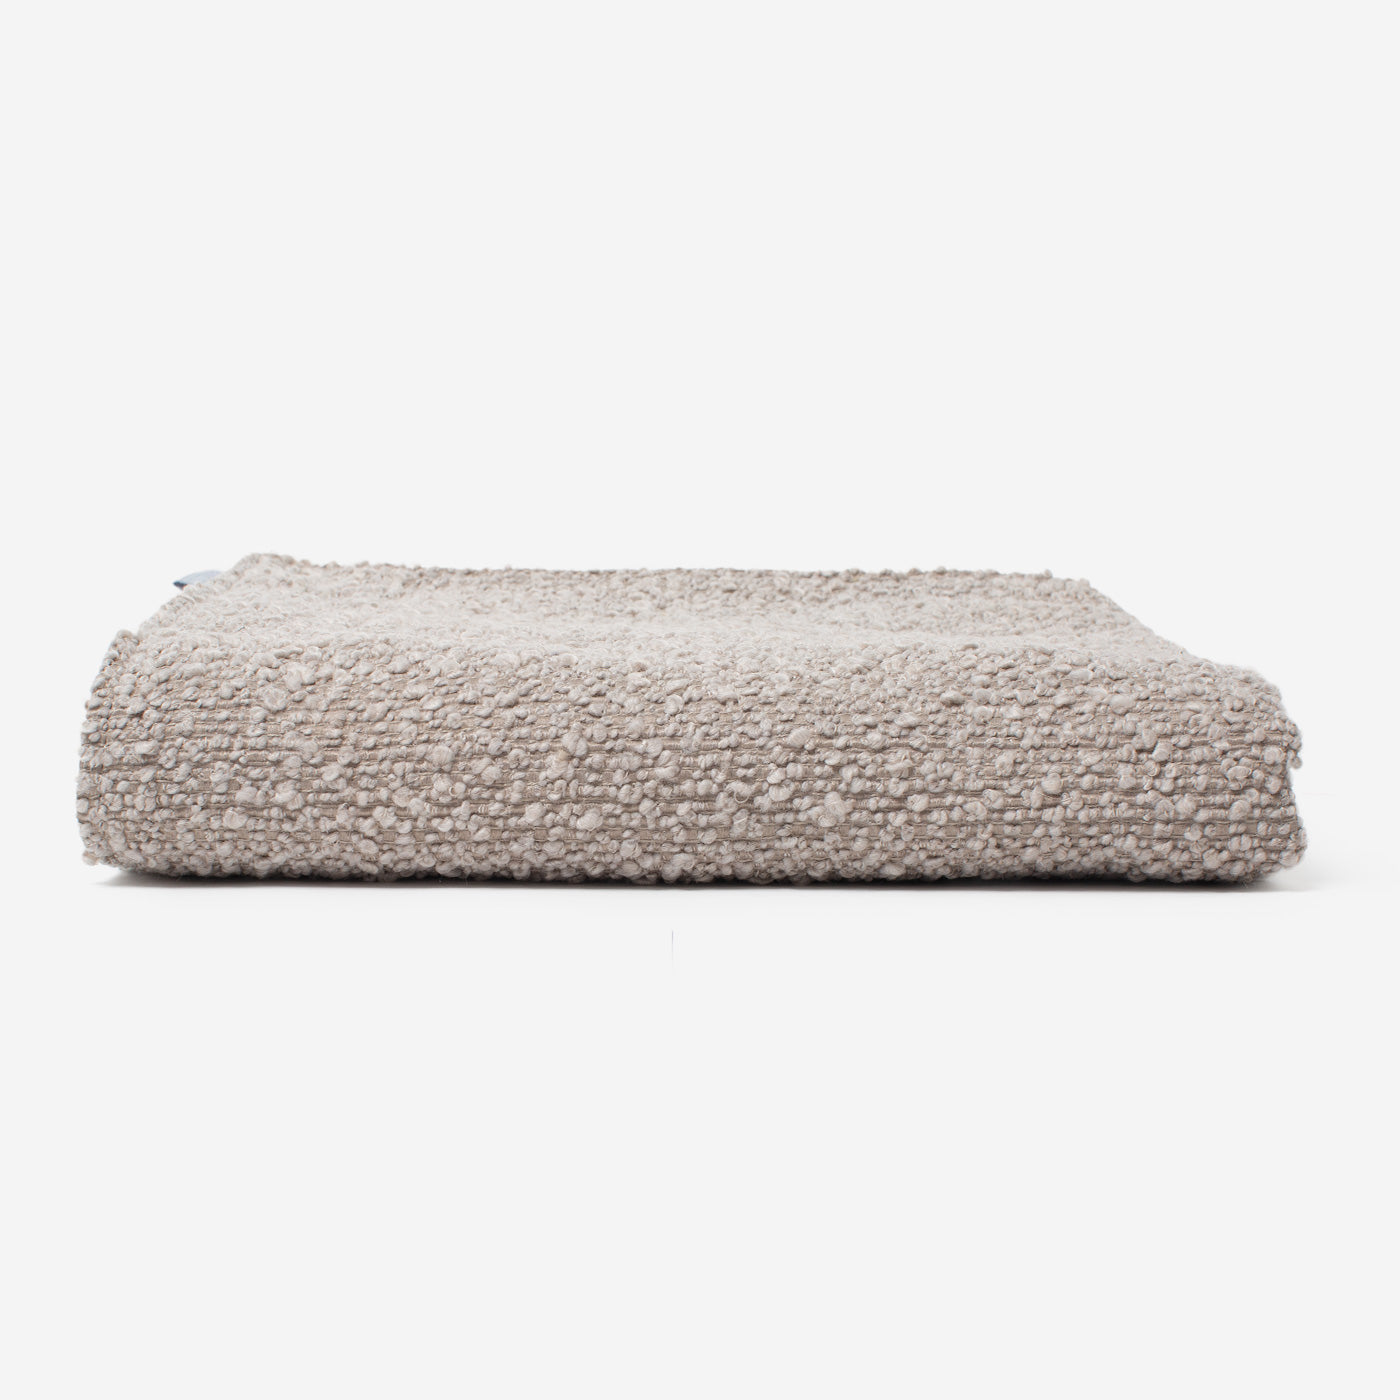 Discover Our Luxurious Dog Blanket In Luxury Mink Bouclé Super Soft Sherpa & Teddy Fleece Lining, The Perfect Blanket For Puppies, Available To Personalise And In 2 Sizes Here at Lords & Labradors